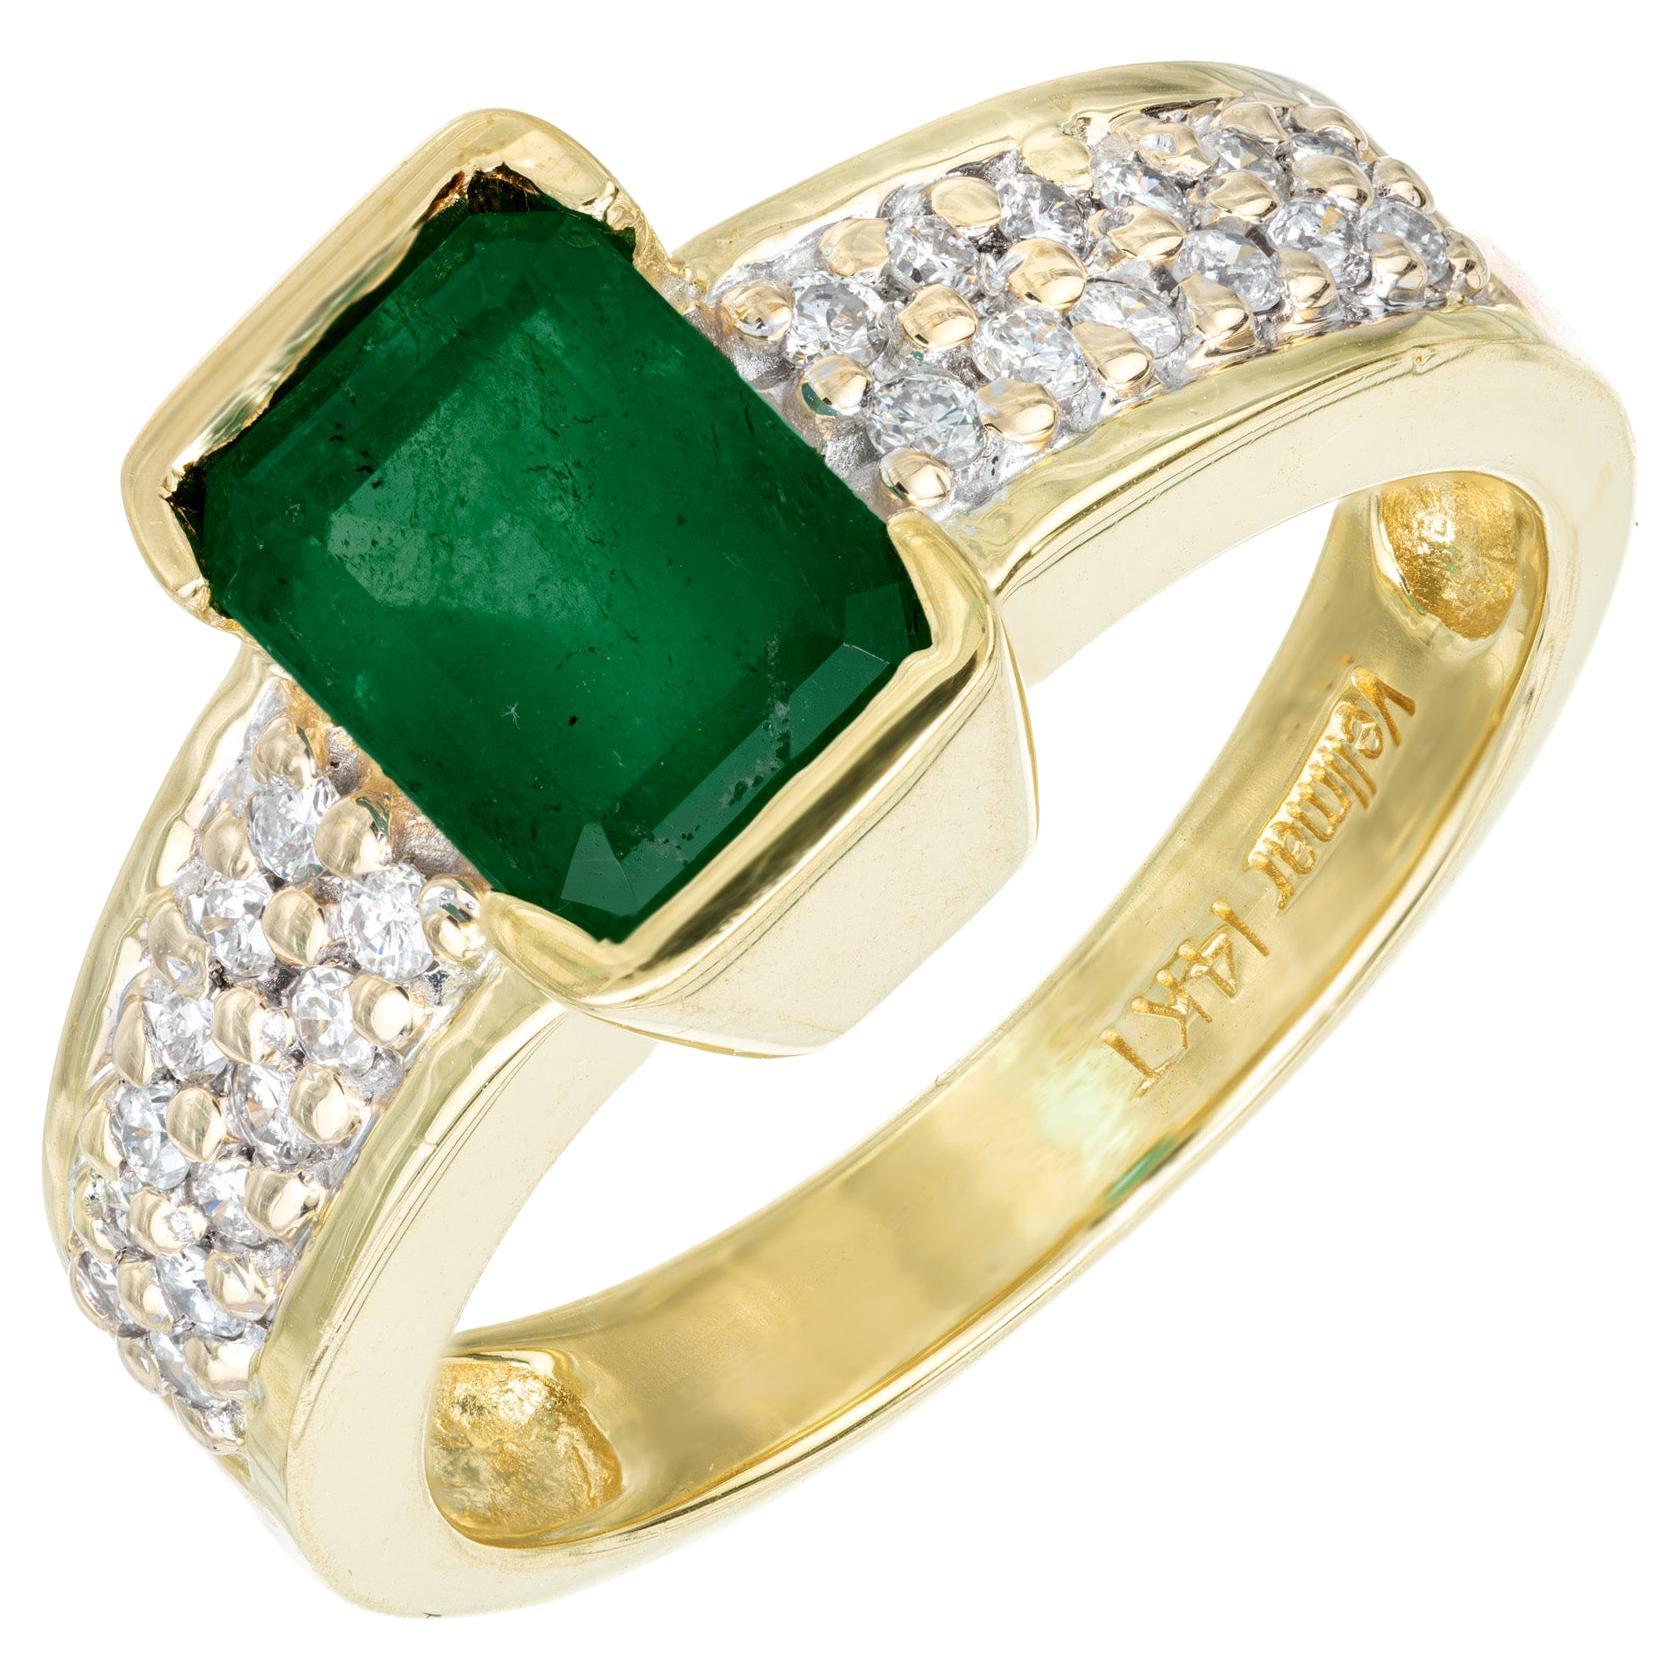 Vellmar GIA Certified 1.63 Carat Emerald Diamond Yellow Gold Engagement Ring For Sale